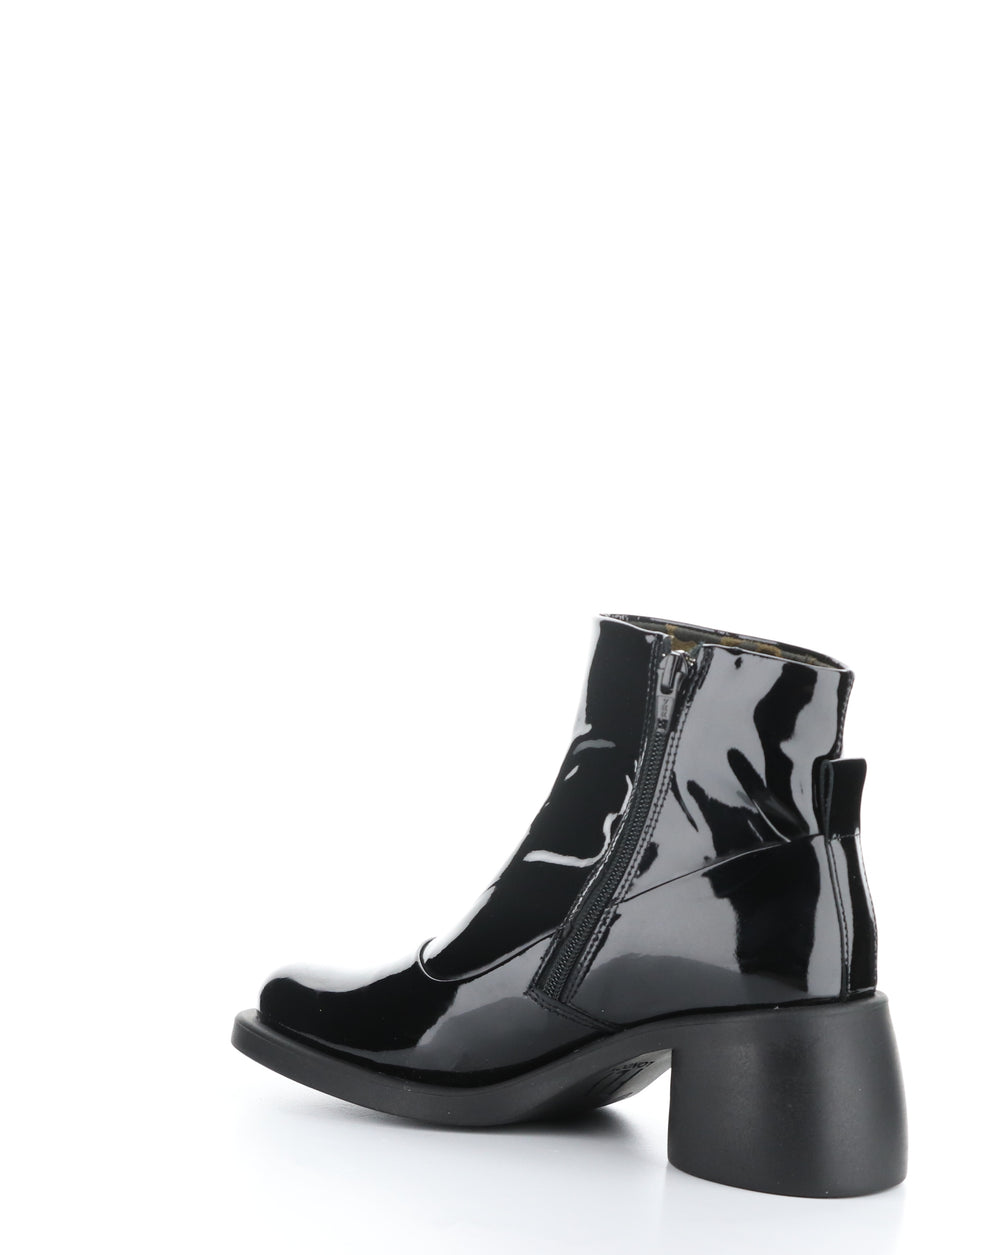 HINT003FLY 005 BLACK Round Toe Boots